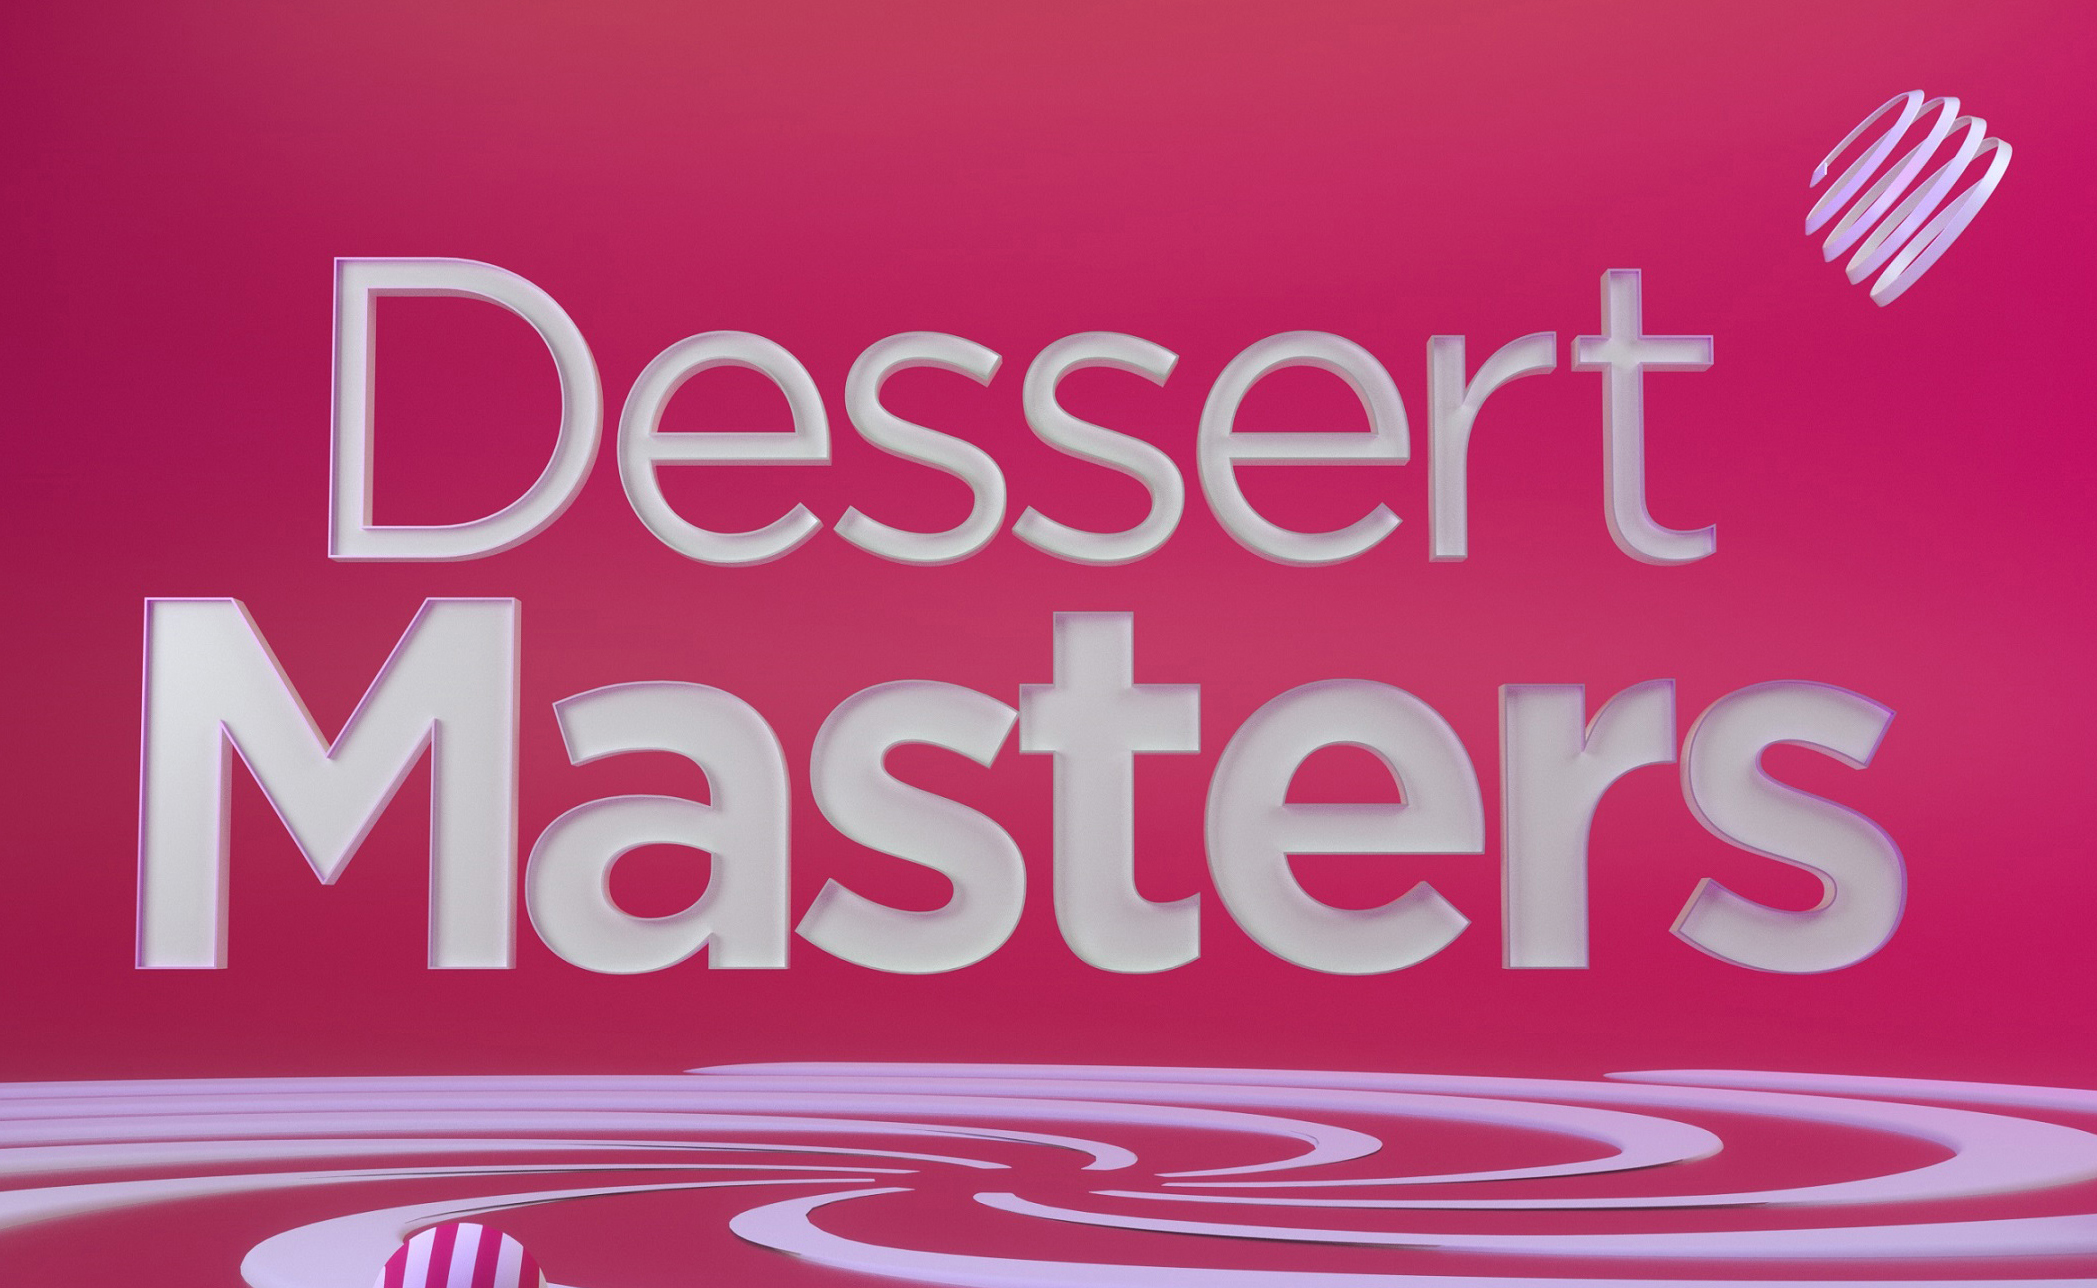 Calling all foodies! MasterChef: Dessert Masters is coming to Channel 10 next year